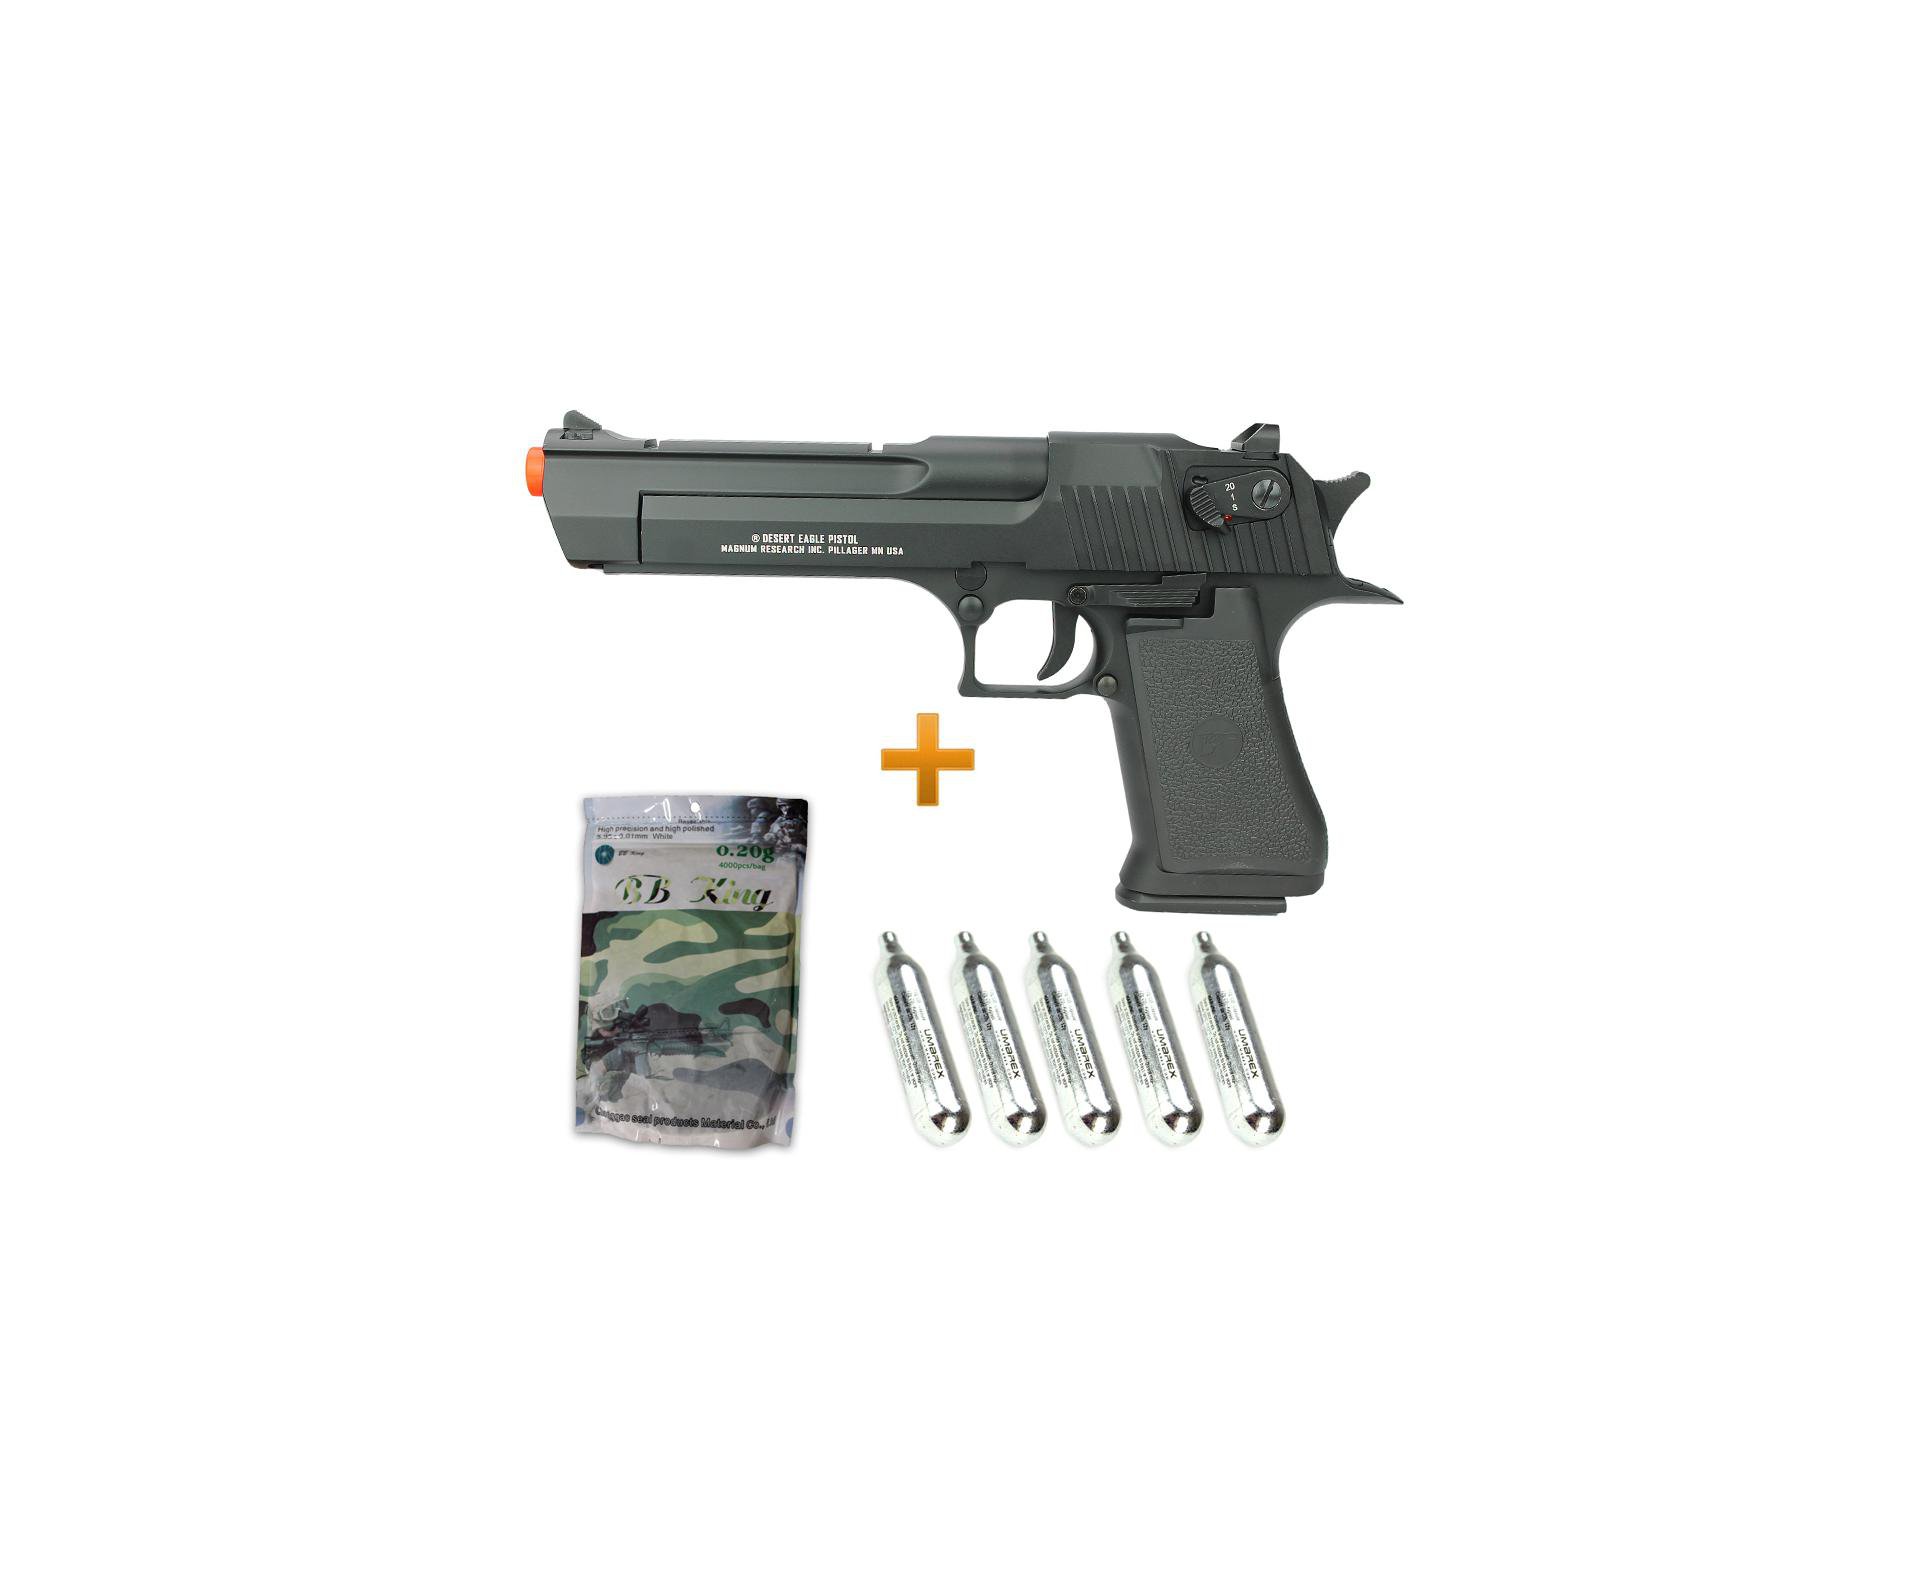 Pistola Deset Eagle .50ae Gas Co2 Airsoft  Full Metal Com Blowback 6,0 + Co2 + Bbs 0,20g